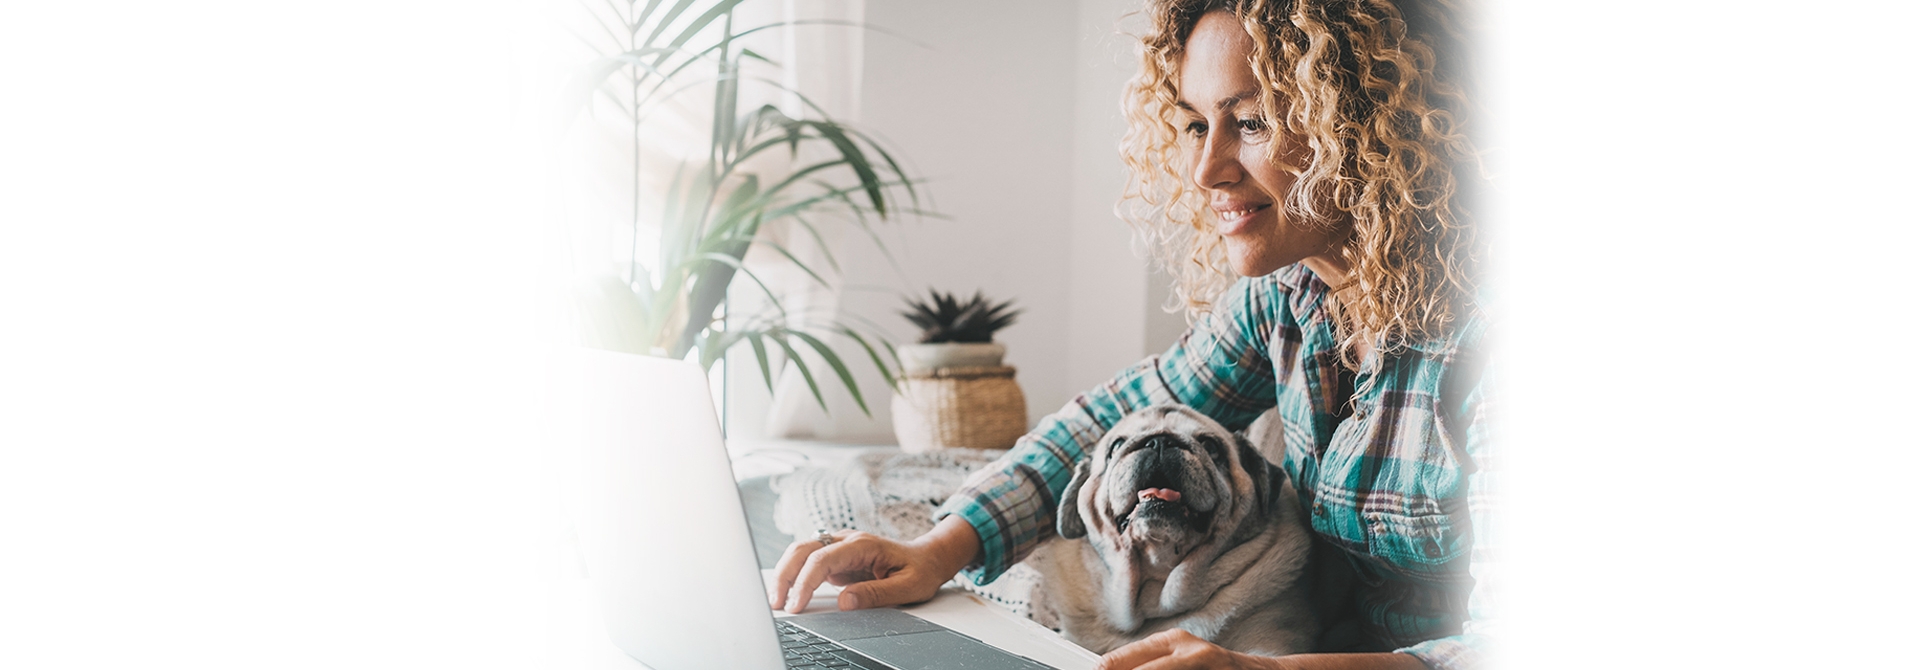 Lady on a computer with a dog. 